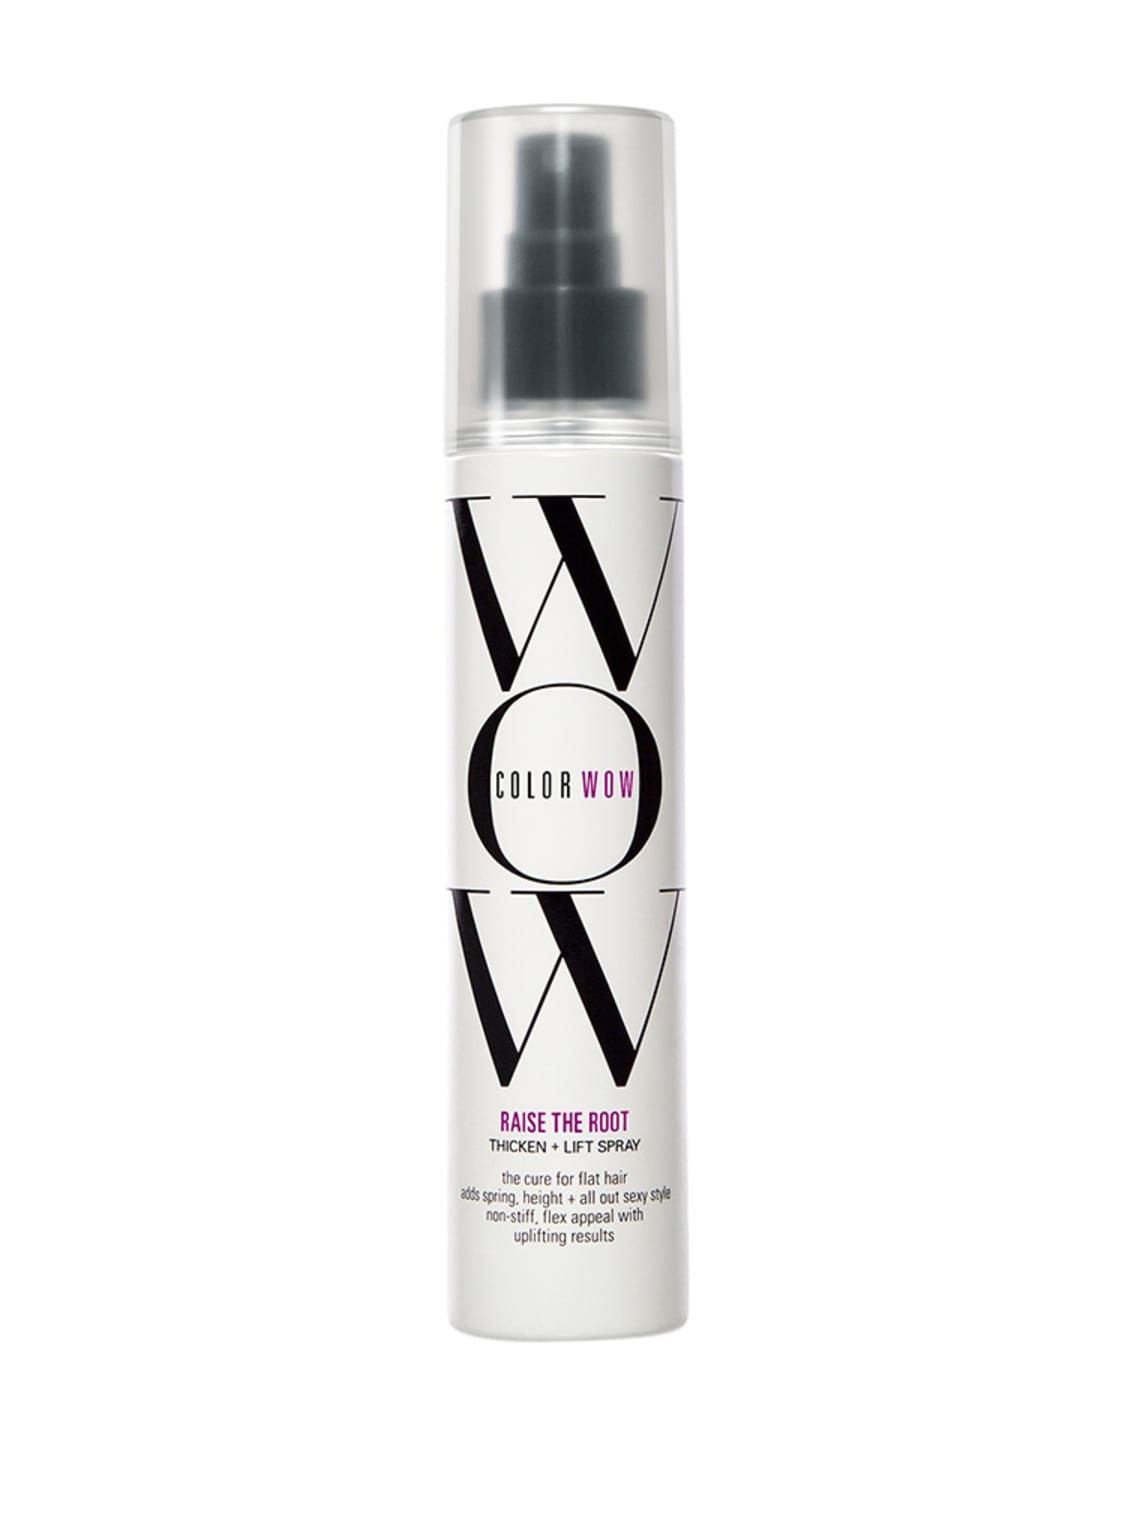 Color Wow Raise The Root Thicken + Lift Spray Haarspray 150 ml von COLOR WOW